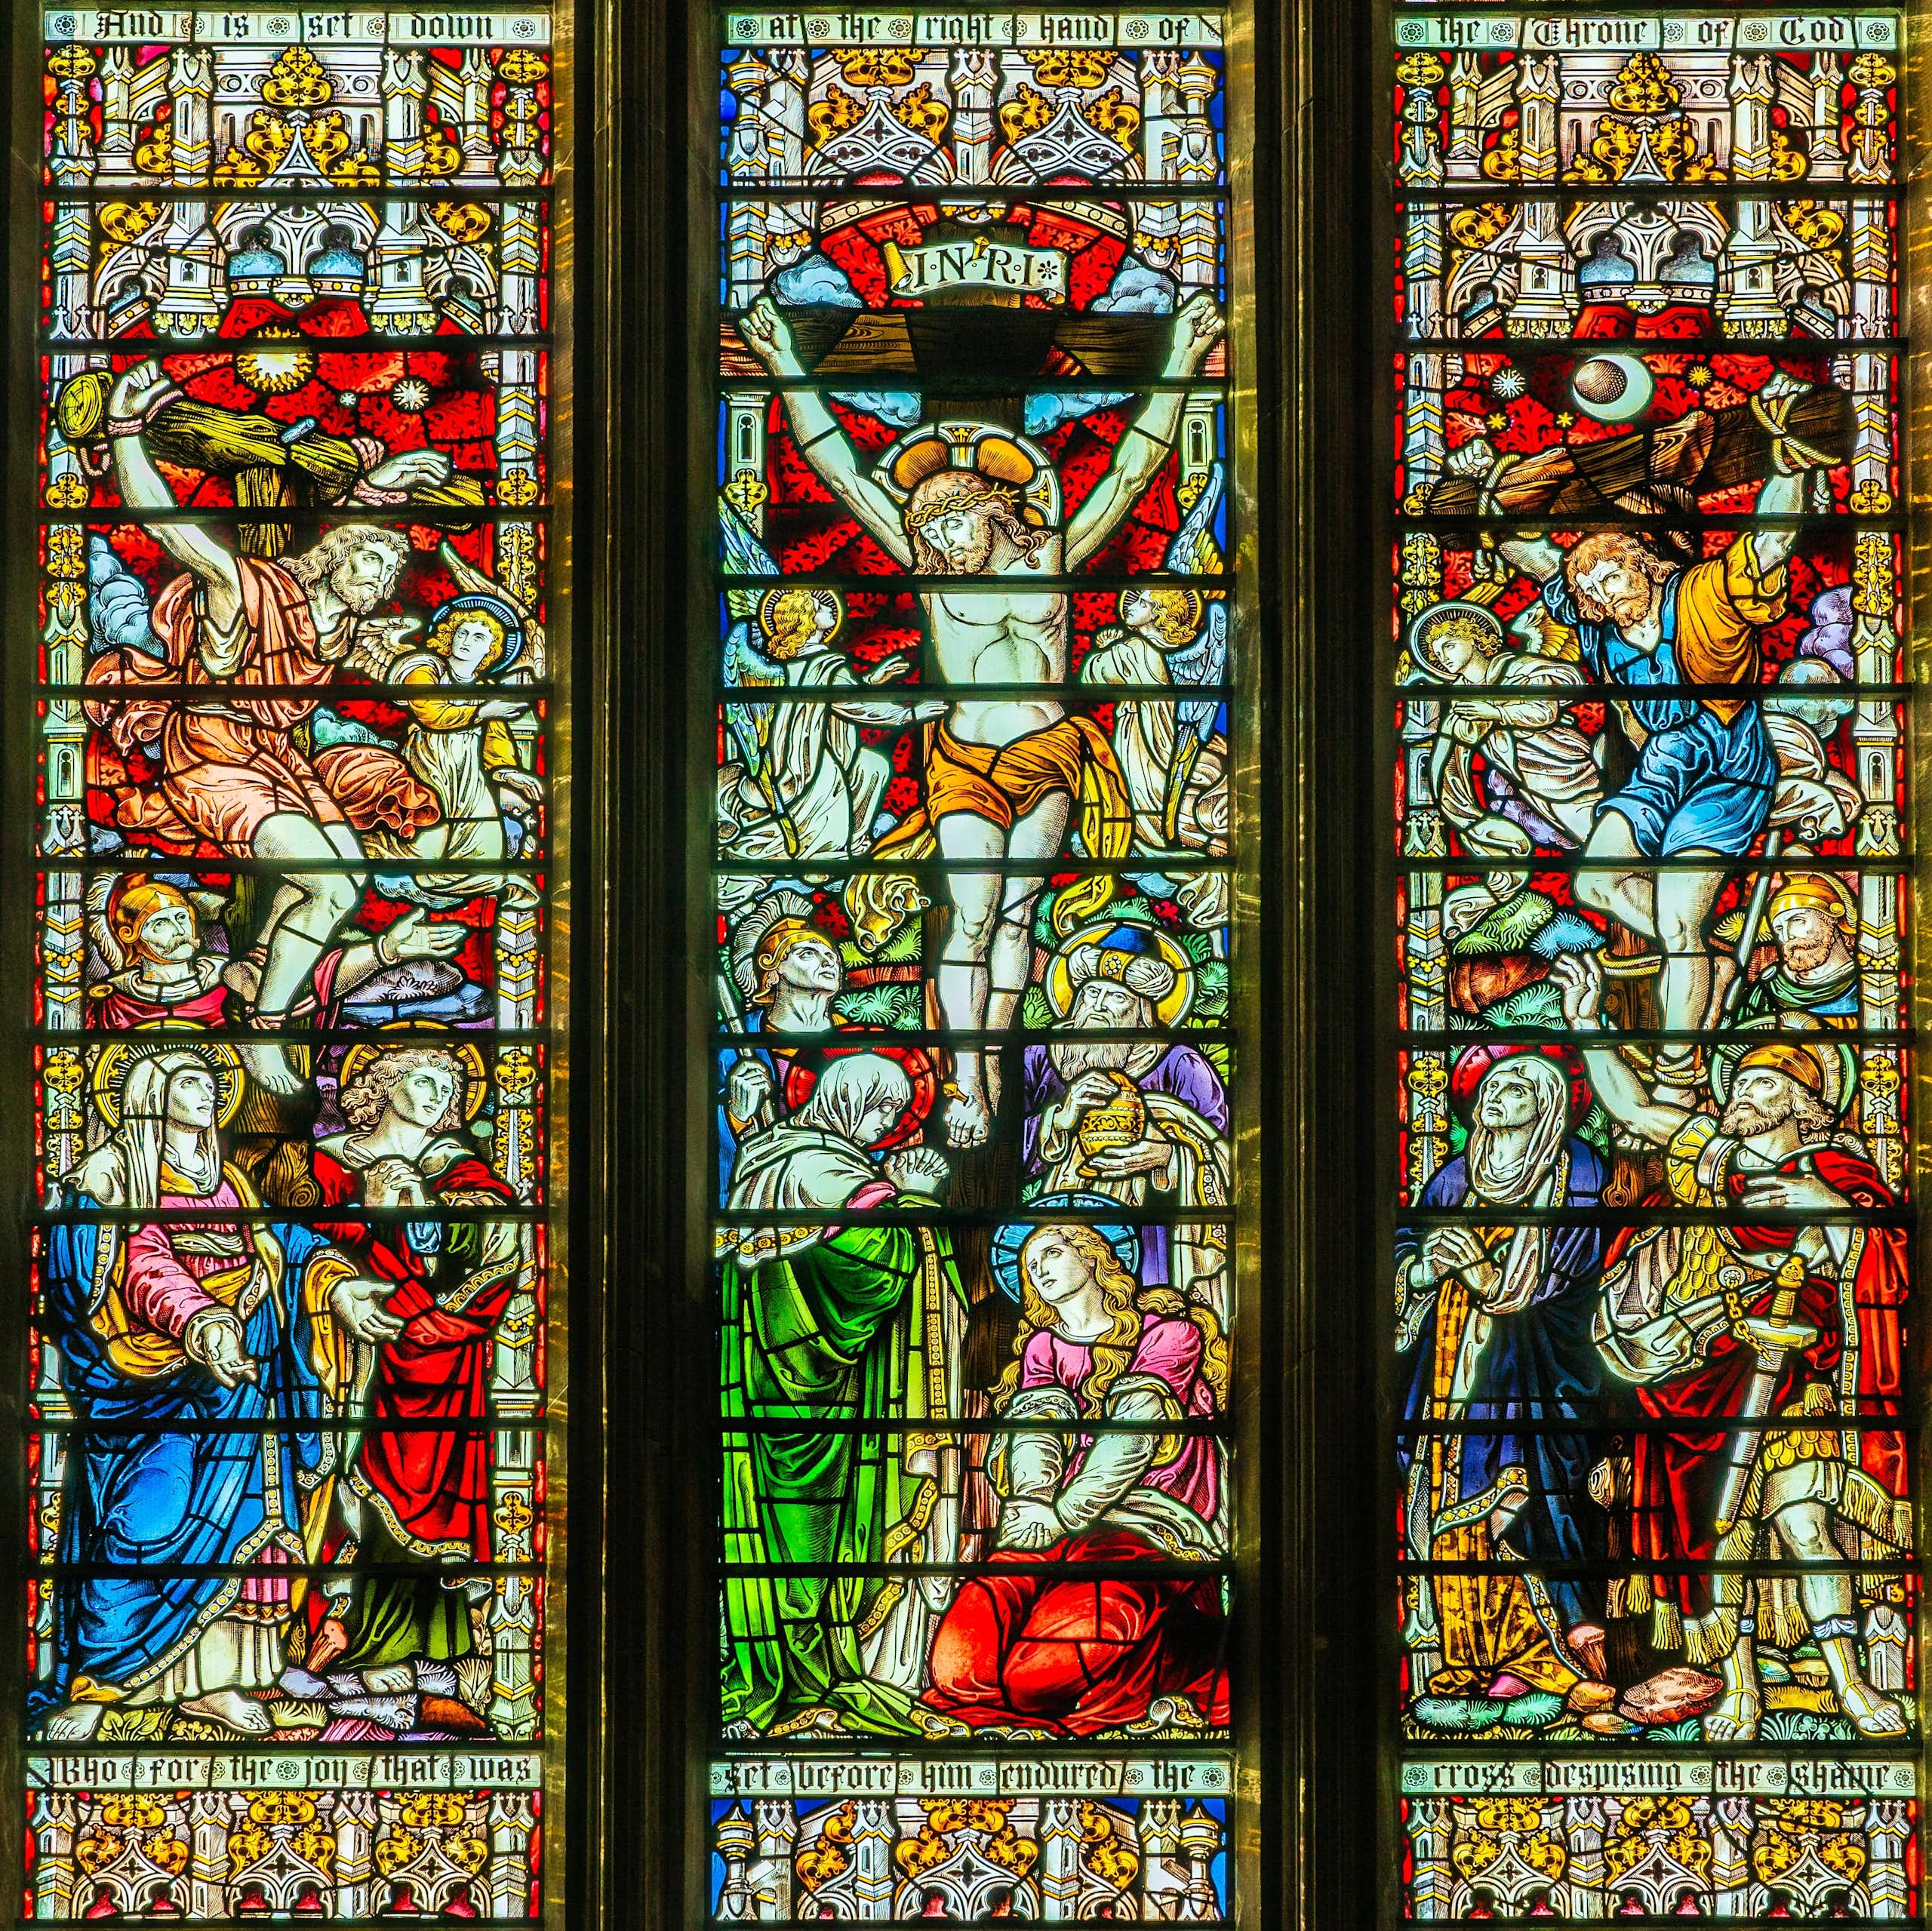 A stained glass window depicting the crucifixion.